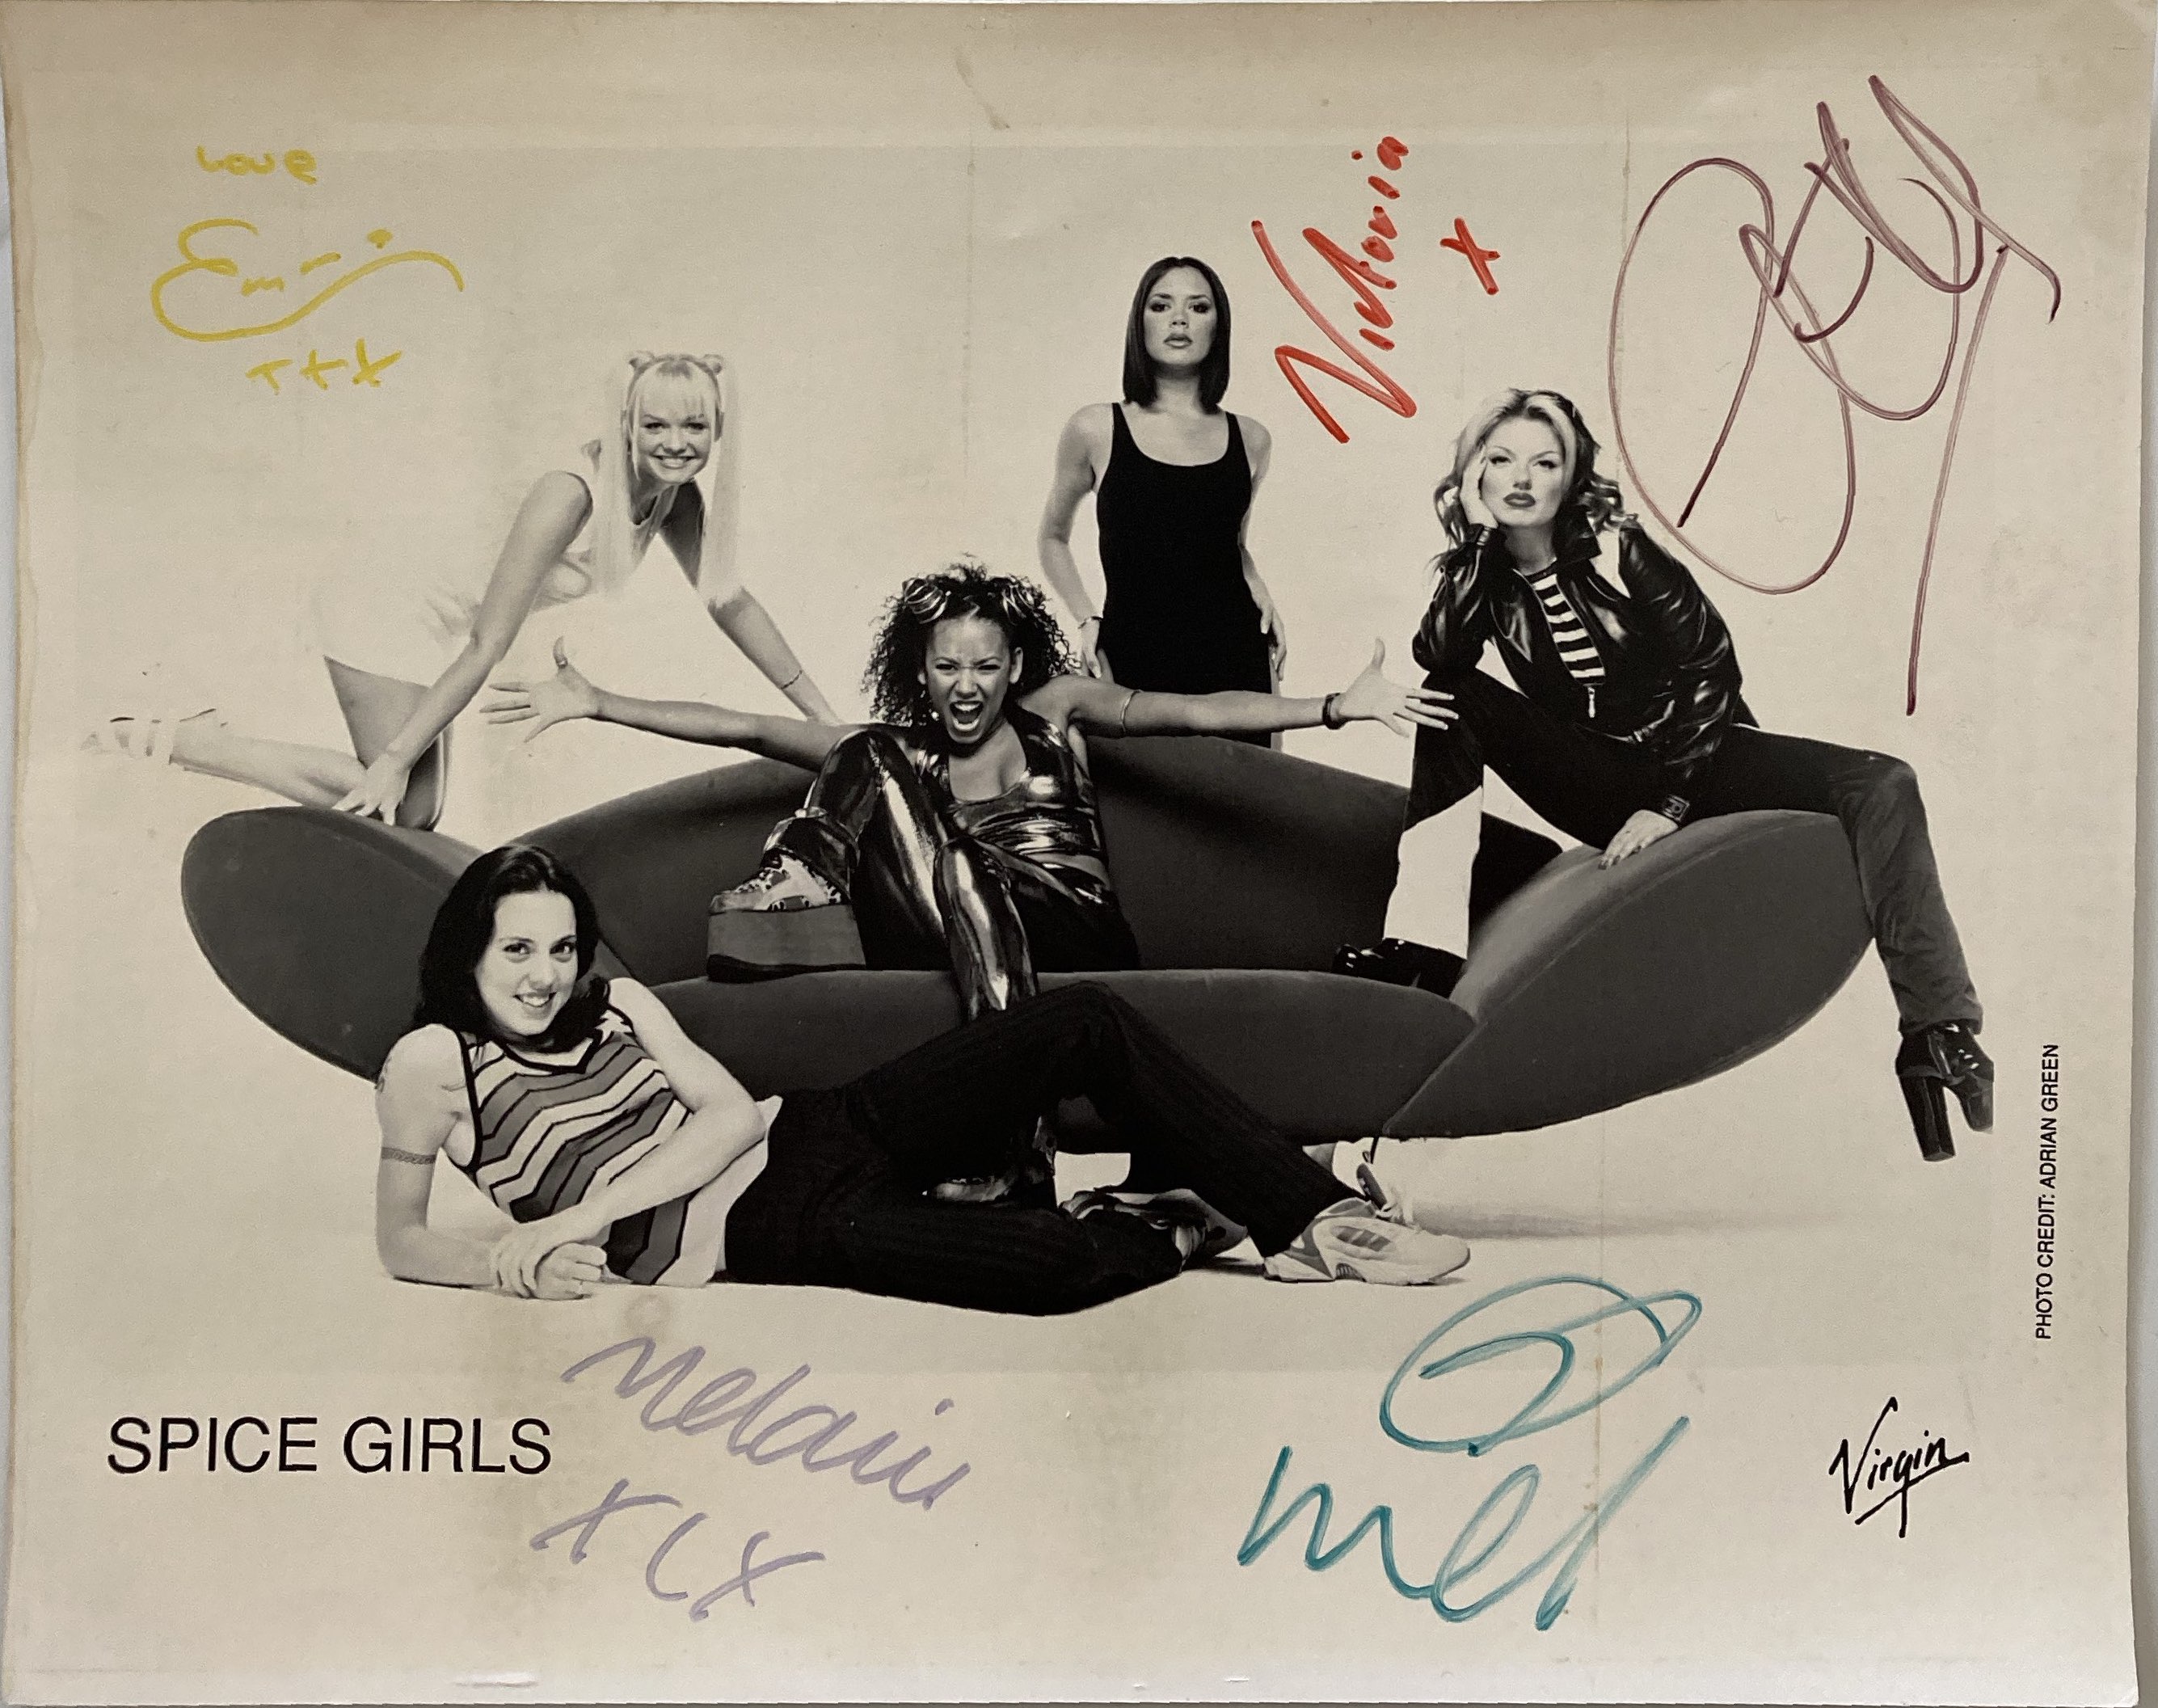 Lot 337 Spice Girls Signed Photograph 